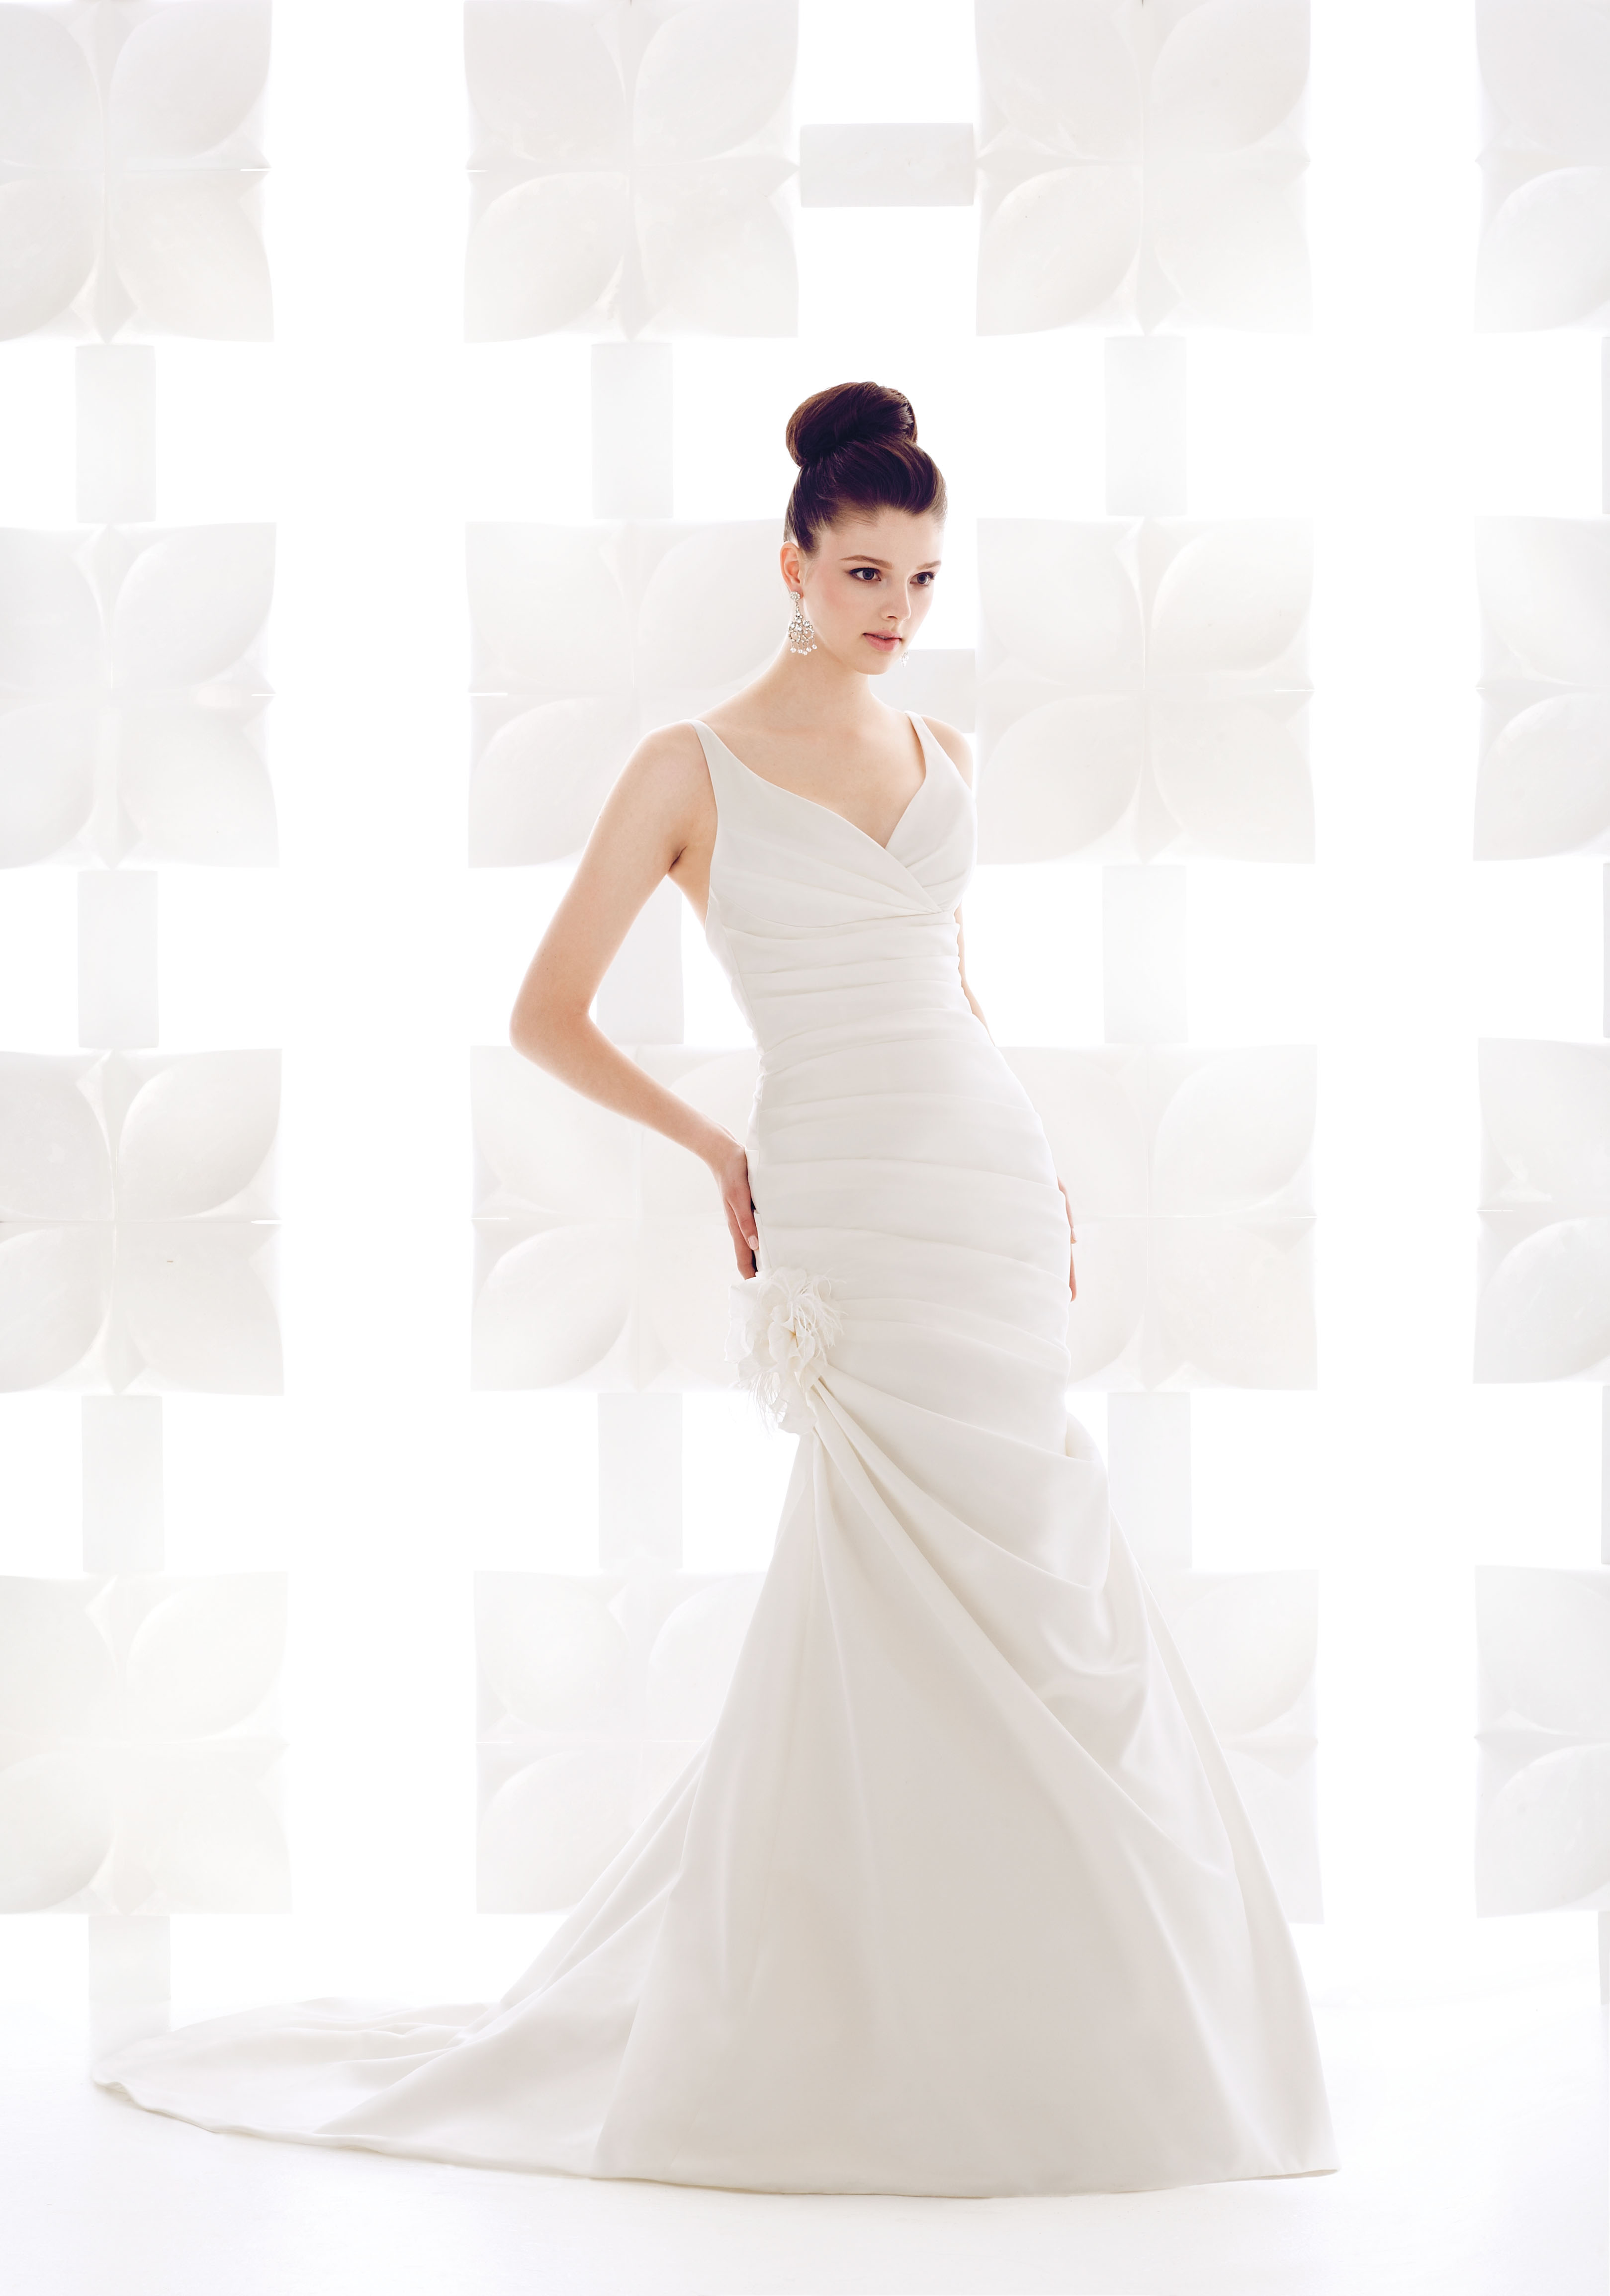 Perfect Wedding Dress for the Apple Shaped Bride